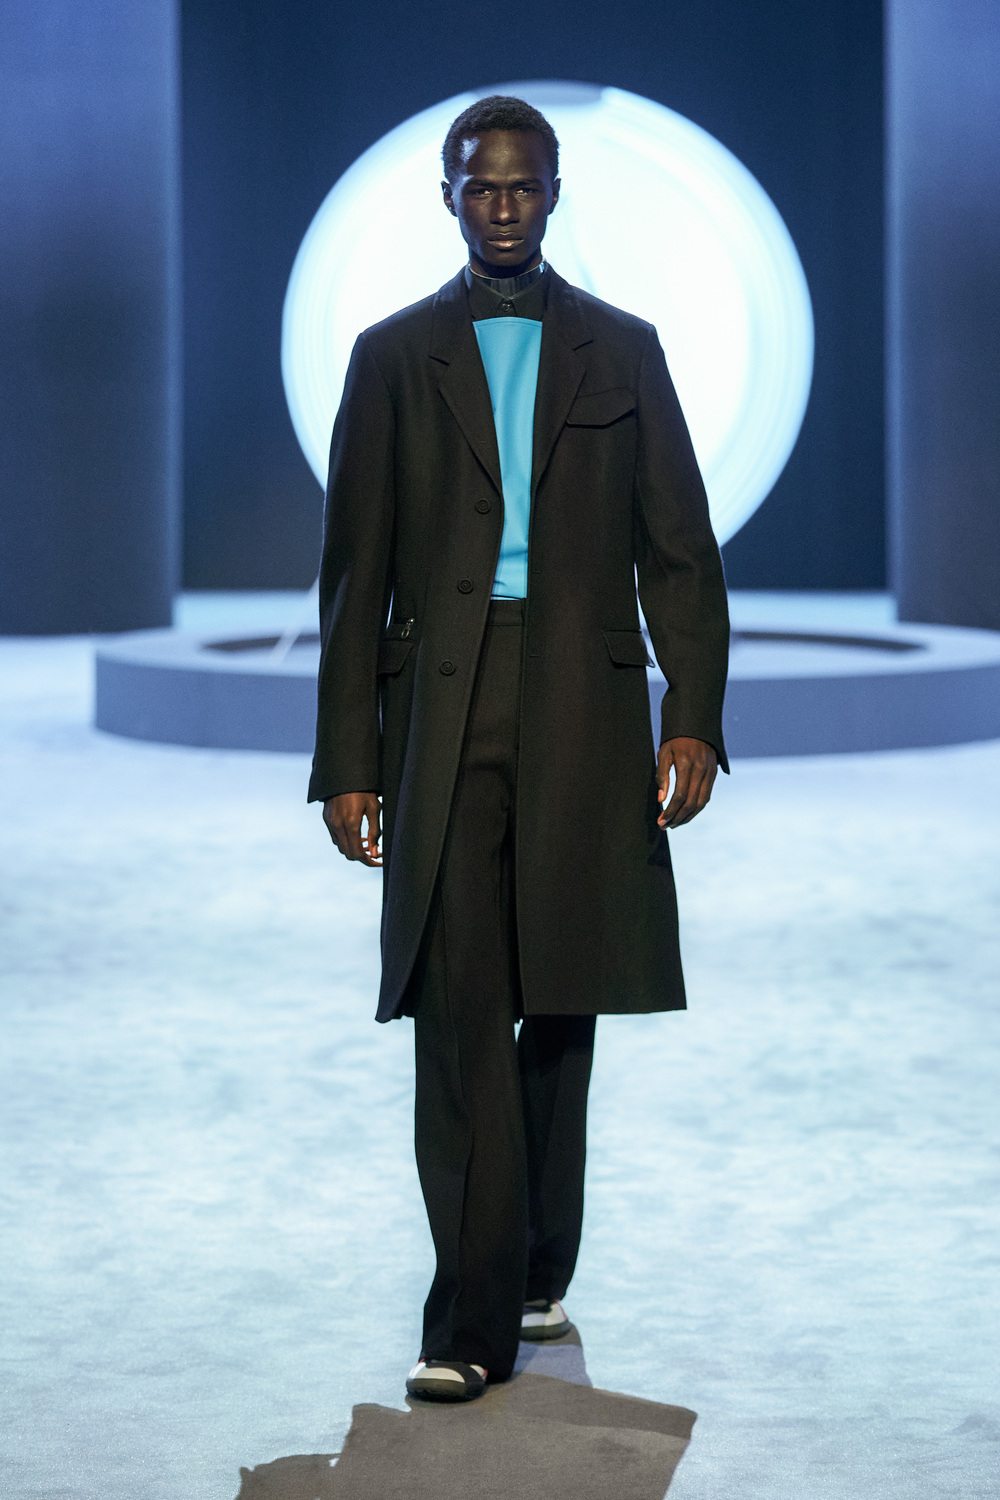 Salvatore Ferragamo reveals an astonishing Fall-Winter 2021-2022 collection with a science-fiction theme